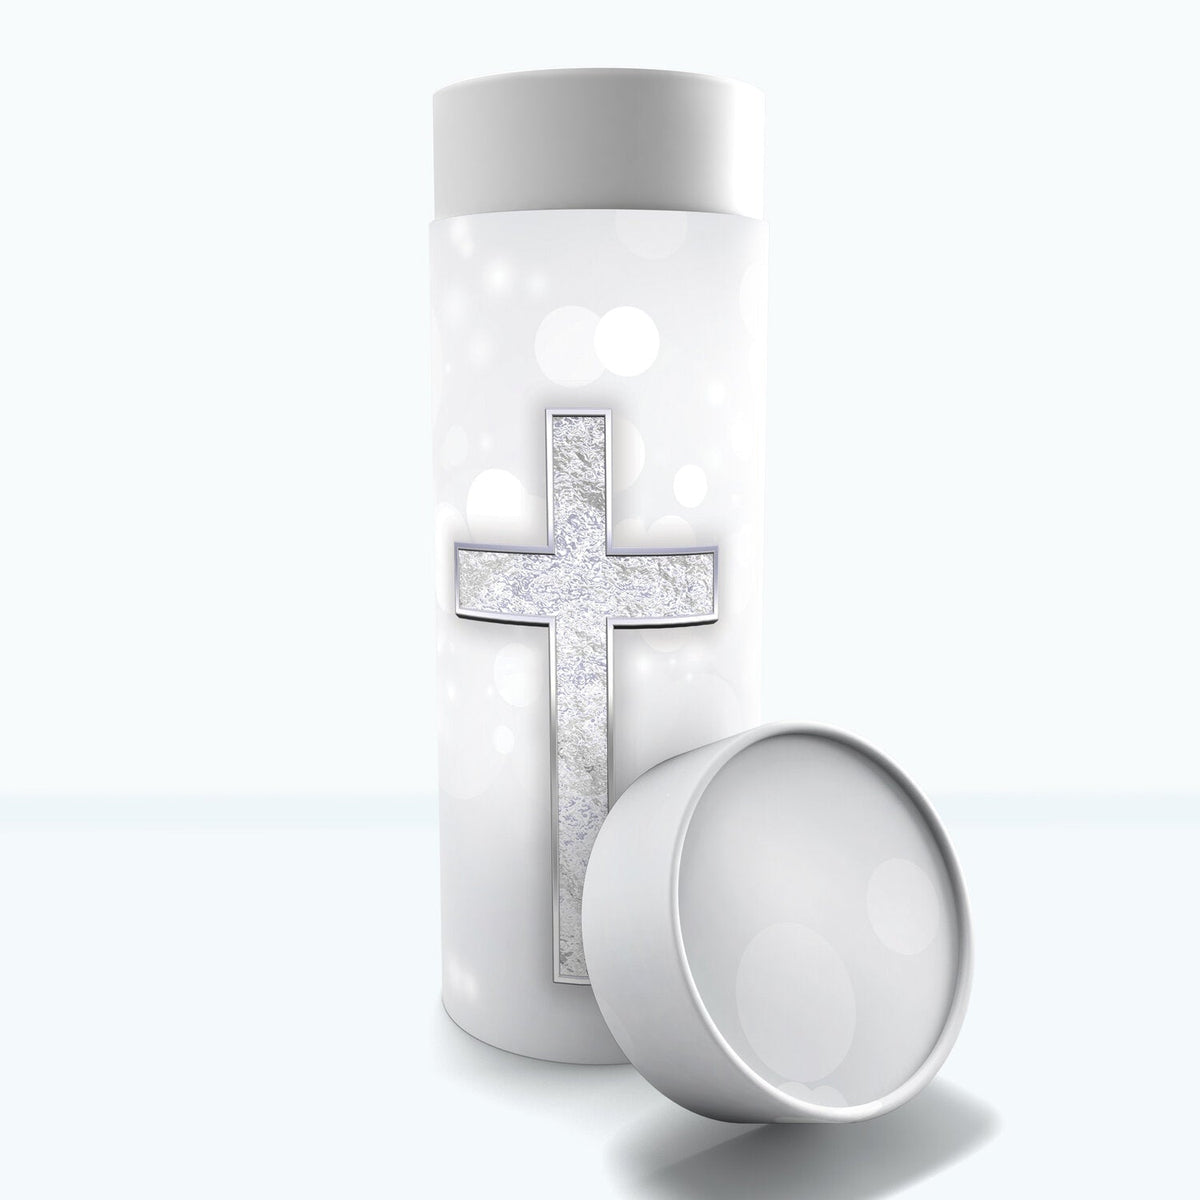 Commemorative Cremation Urns Small Silver Cross Biodegradable &amp; Eco Friendly Burial or Scattering Urn / Tube